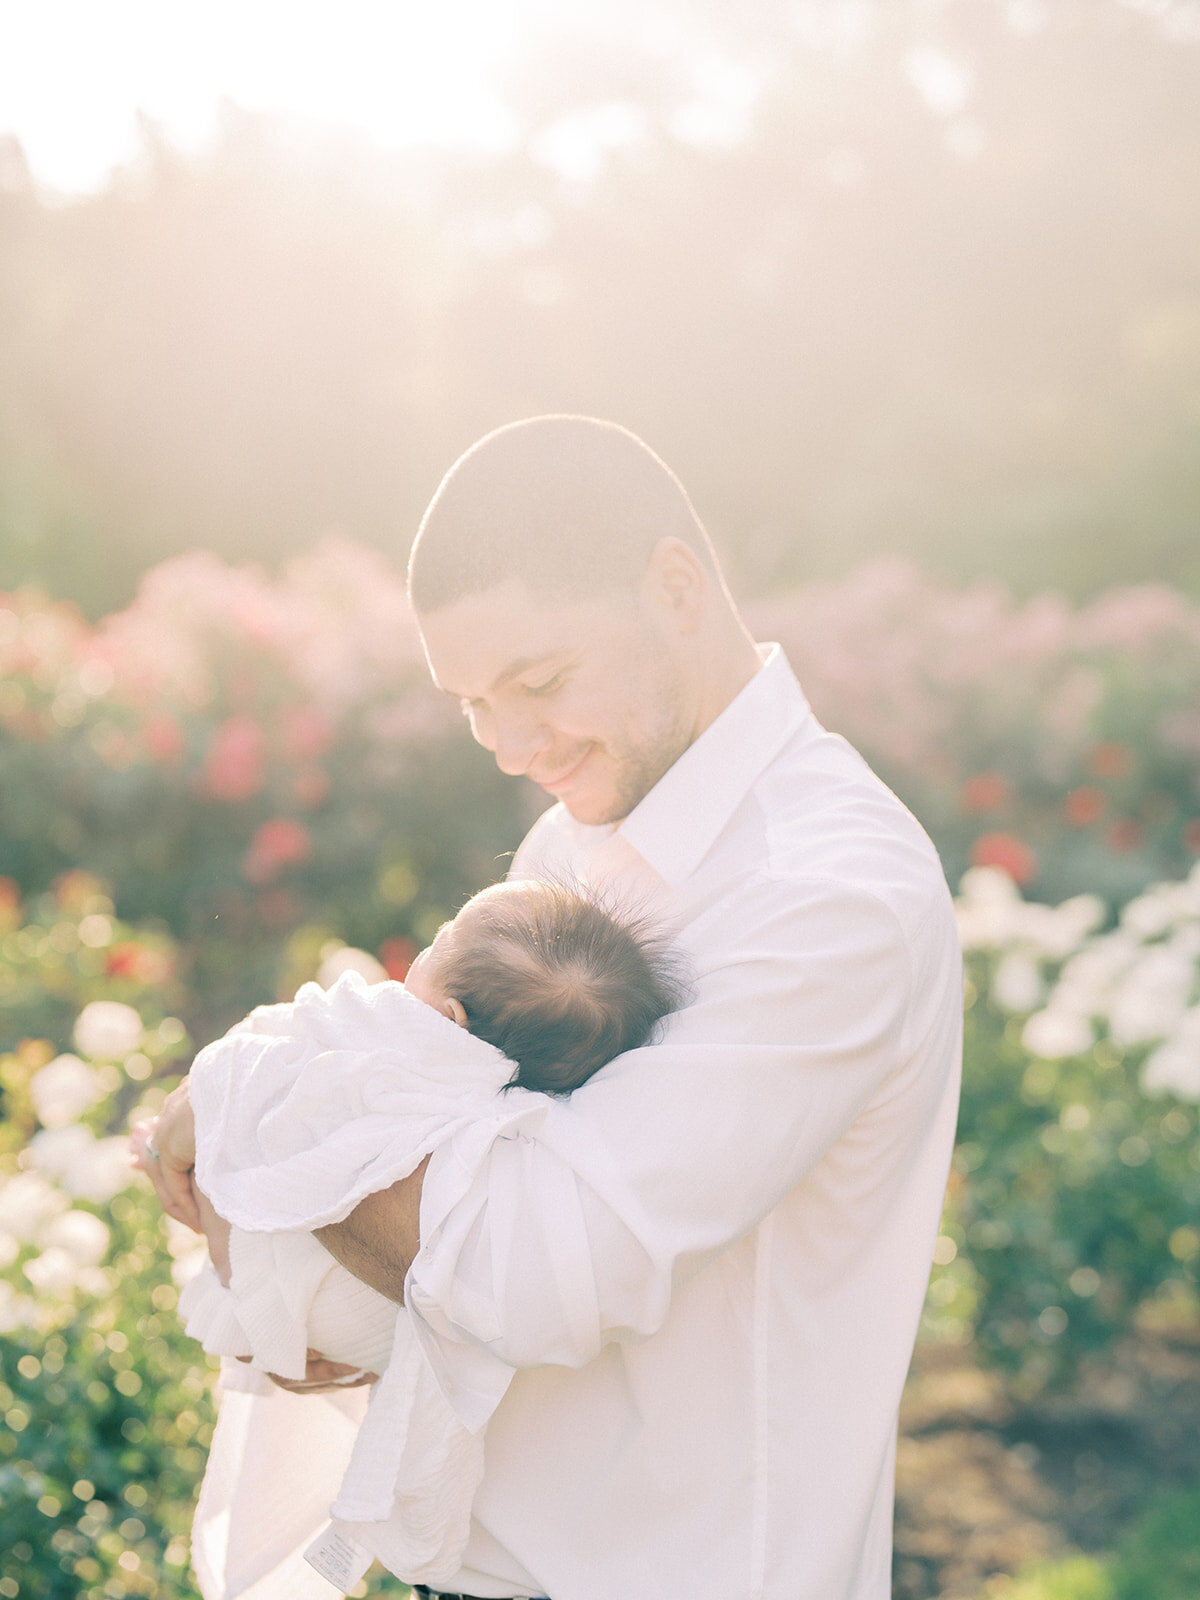 Father smiles down at his newborn baby girl as he holds her in Bon Air Rose Garden at sunset.